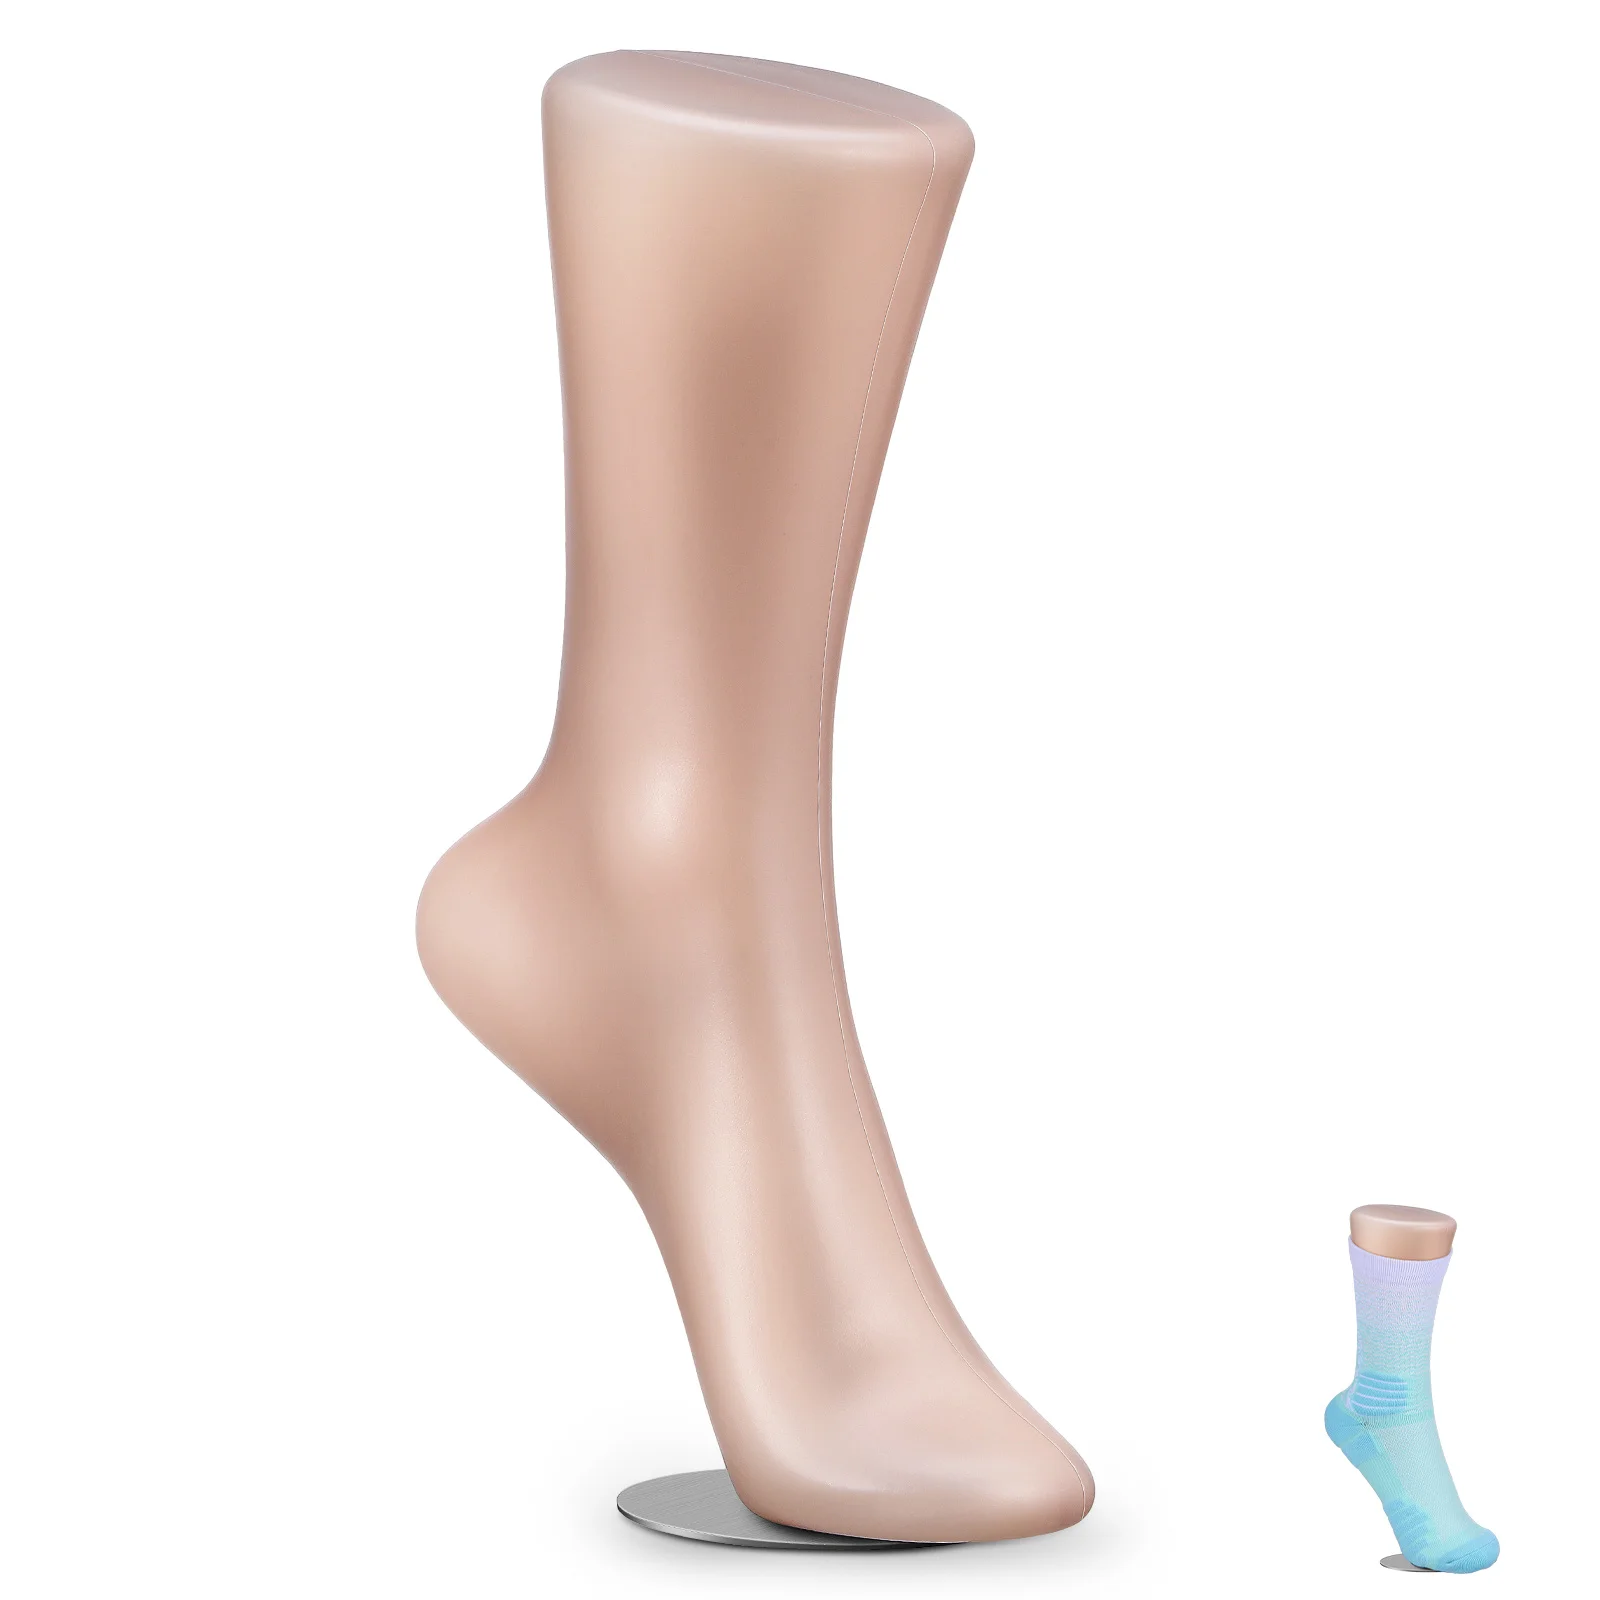 

Plastic Foot Mold Sock Display Stand Mannequin Model Shoes Support Red Socks Fake Feet for White Holder Anklets